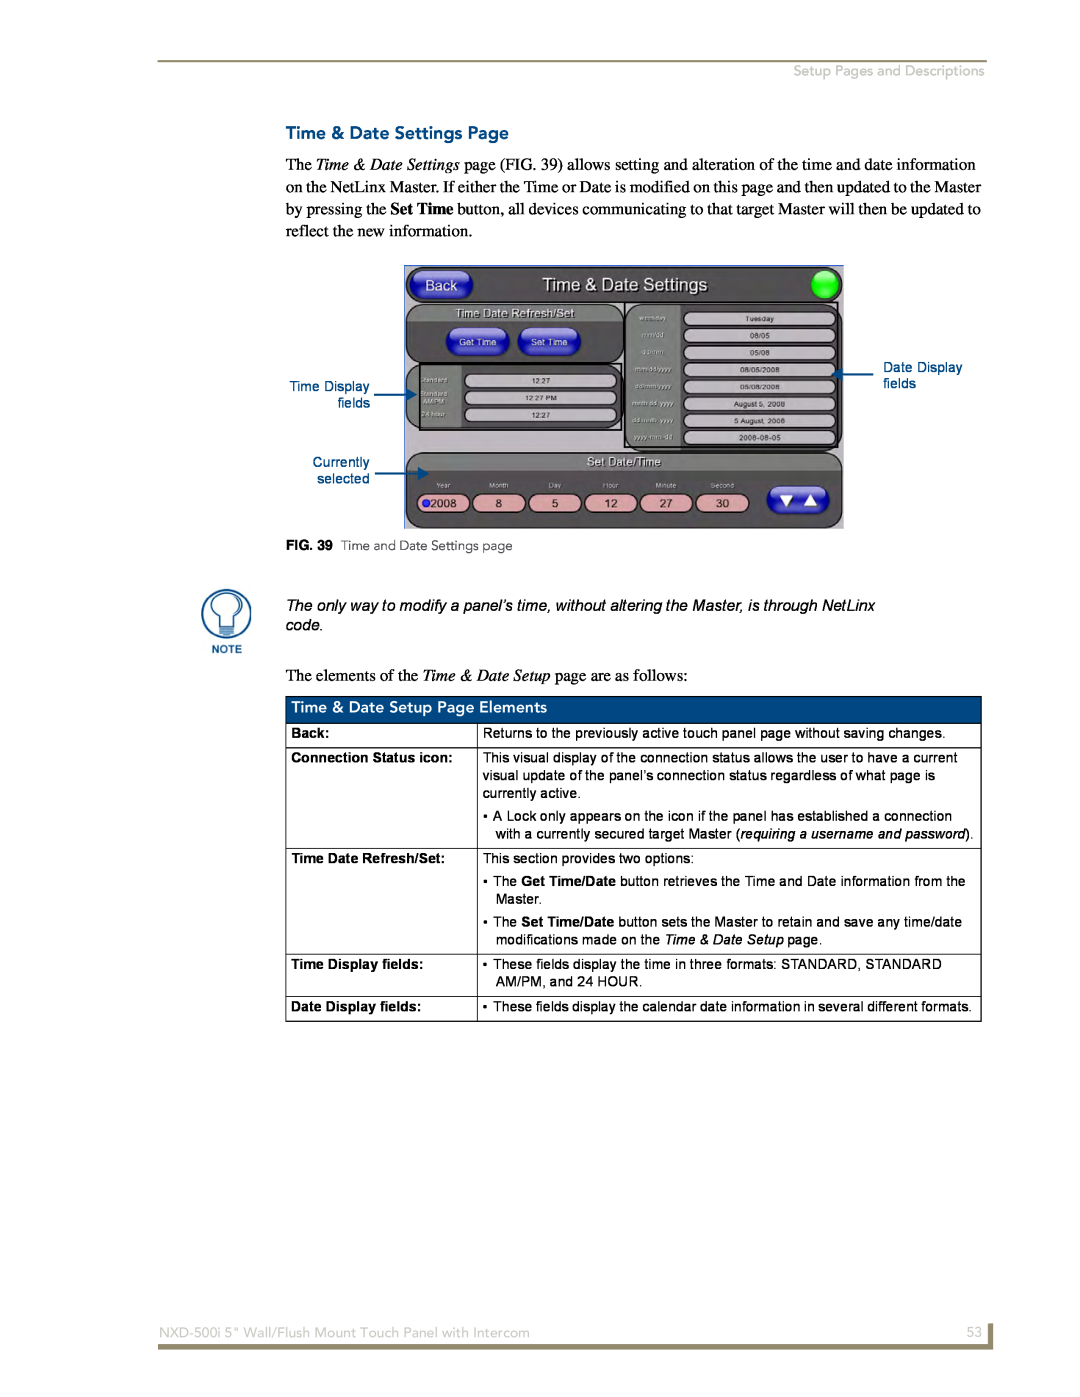 AMX NXD-500i Time & Date Settings Page, Time & Date Setup Page Elements, Setup Pages and Descriptions, Date Display fields 